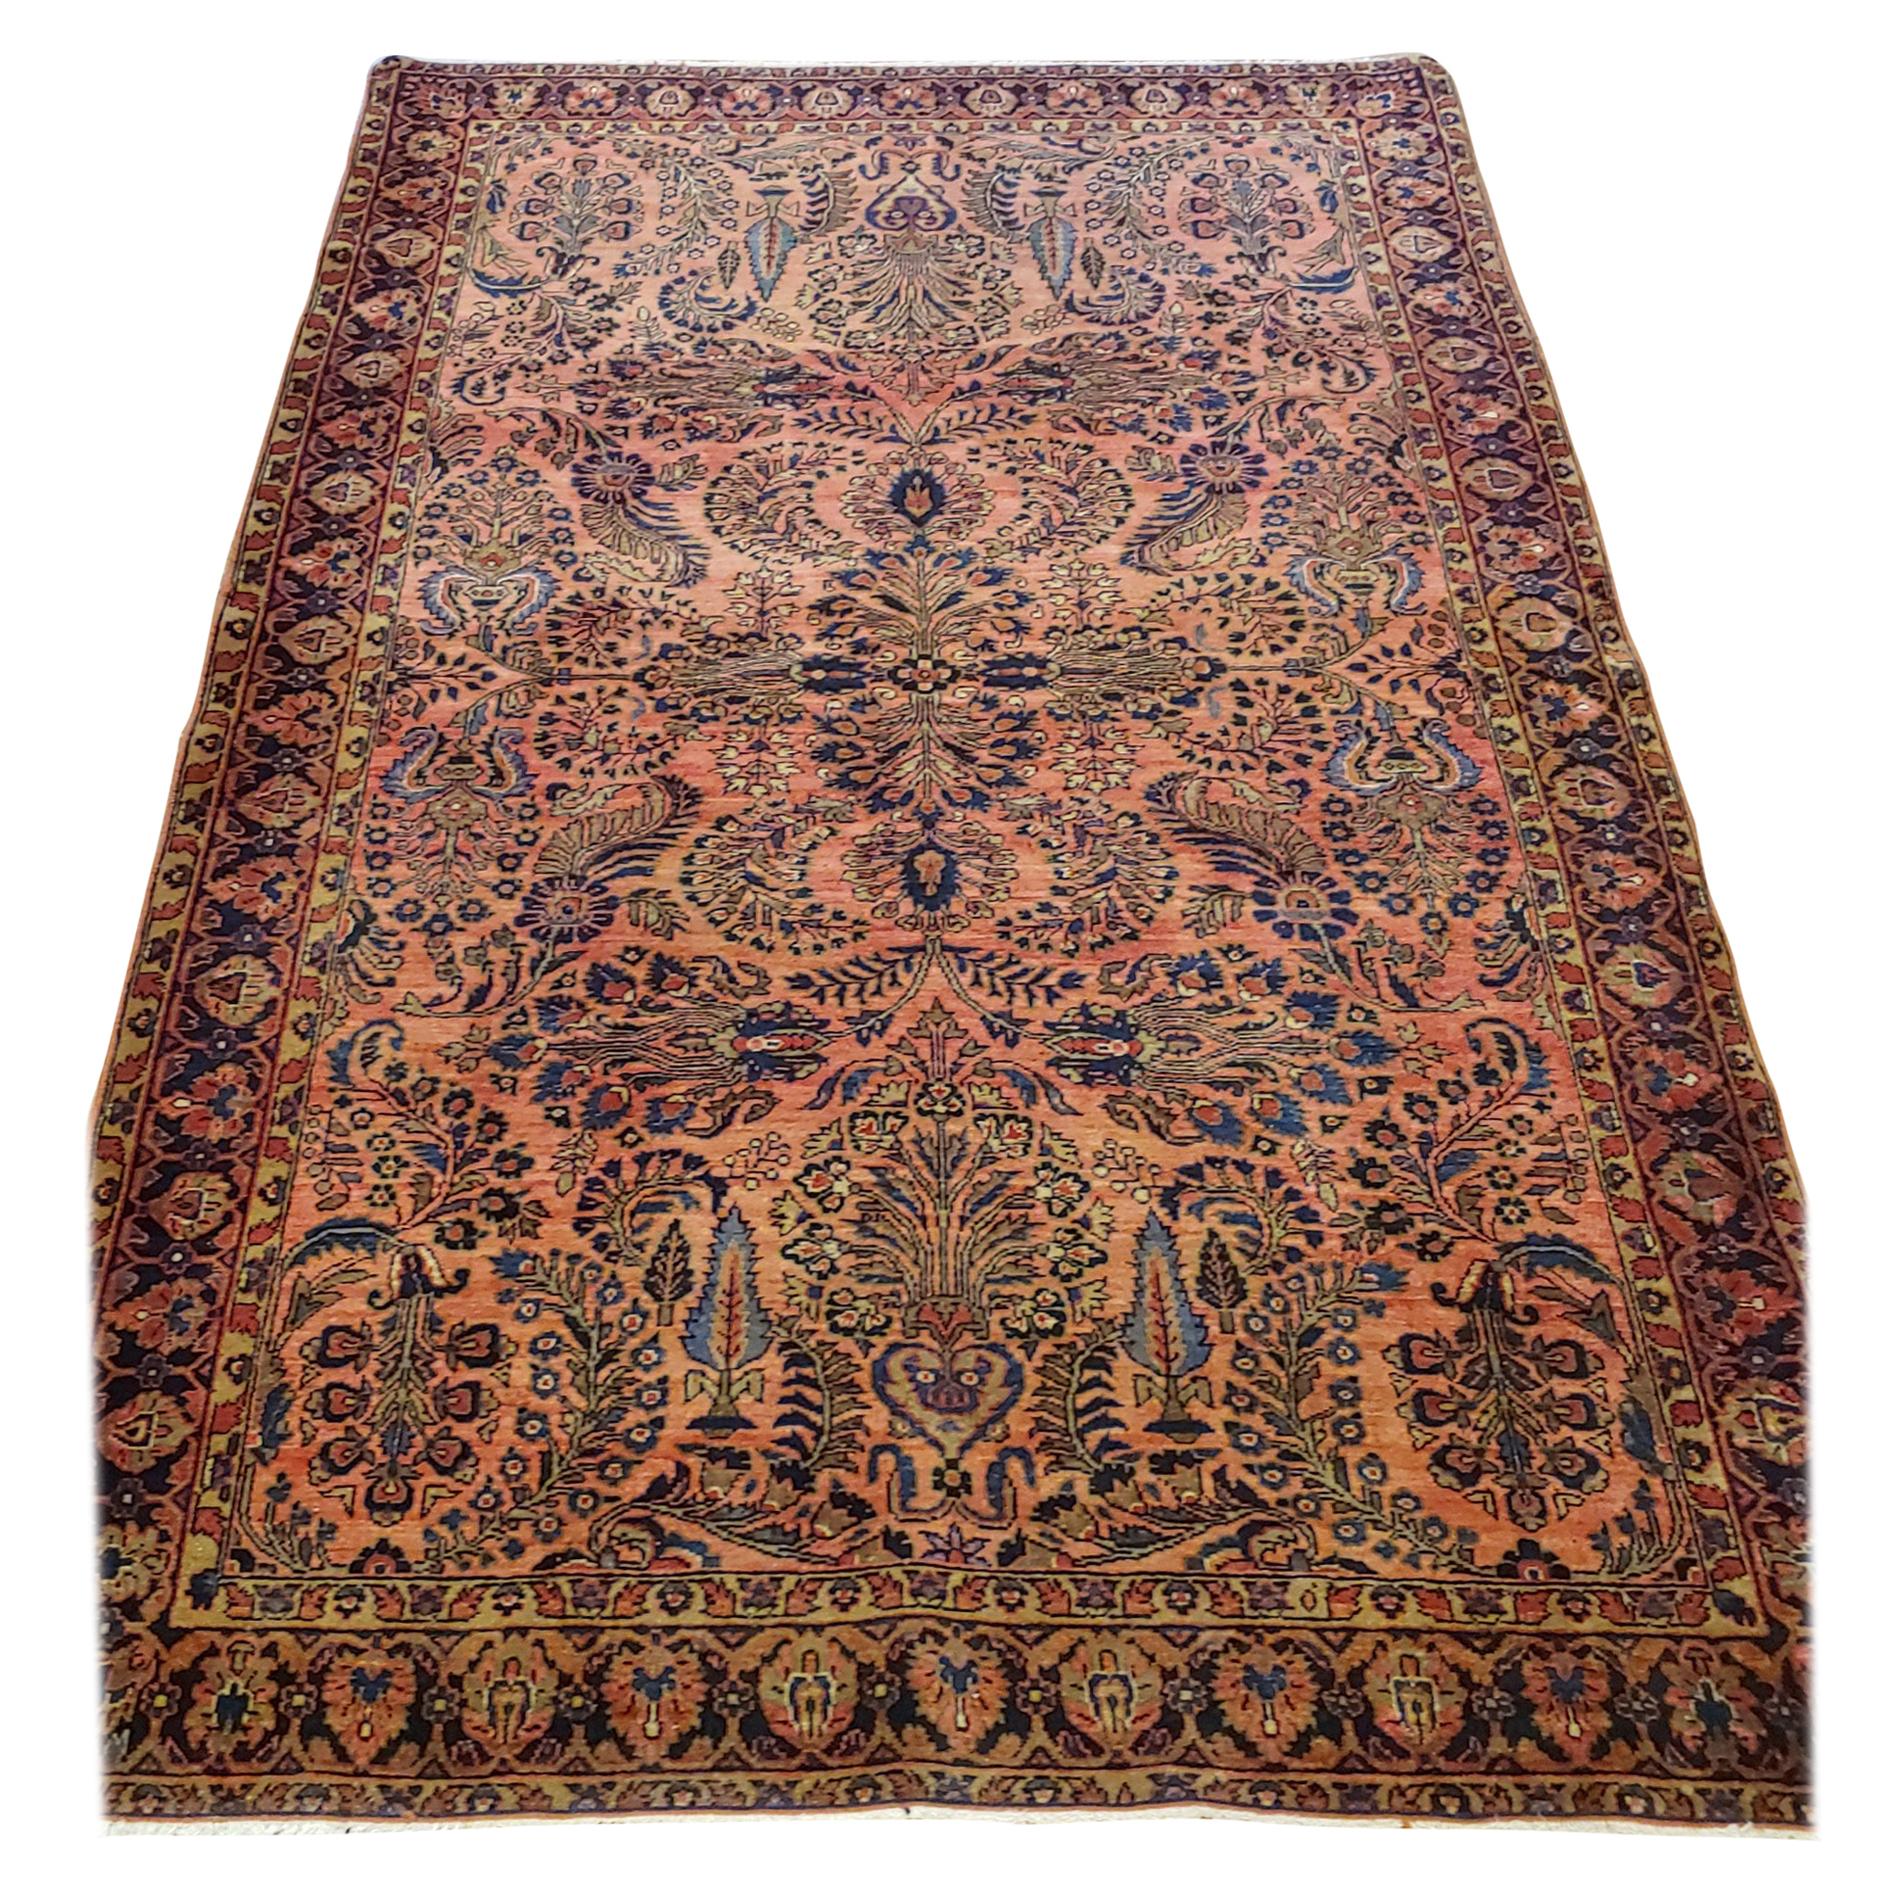 Antique Persian Sarouk, silky wool All-Over Design on Rust Field, Wool, 4x6 1915 For Sale